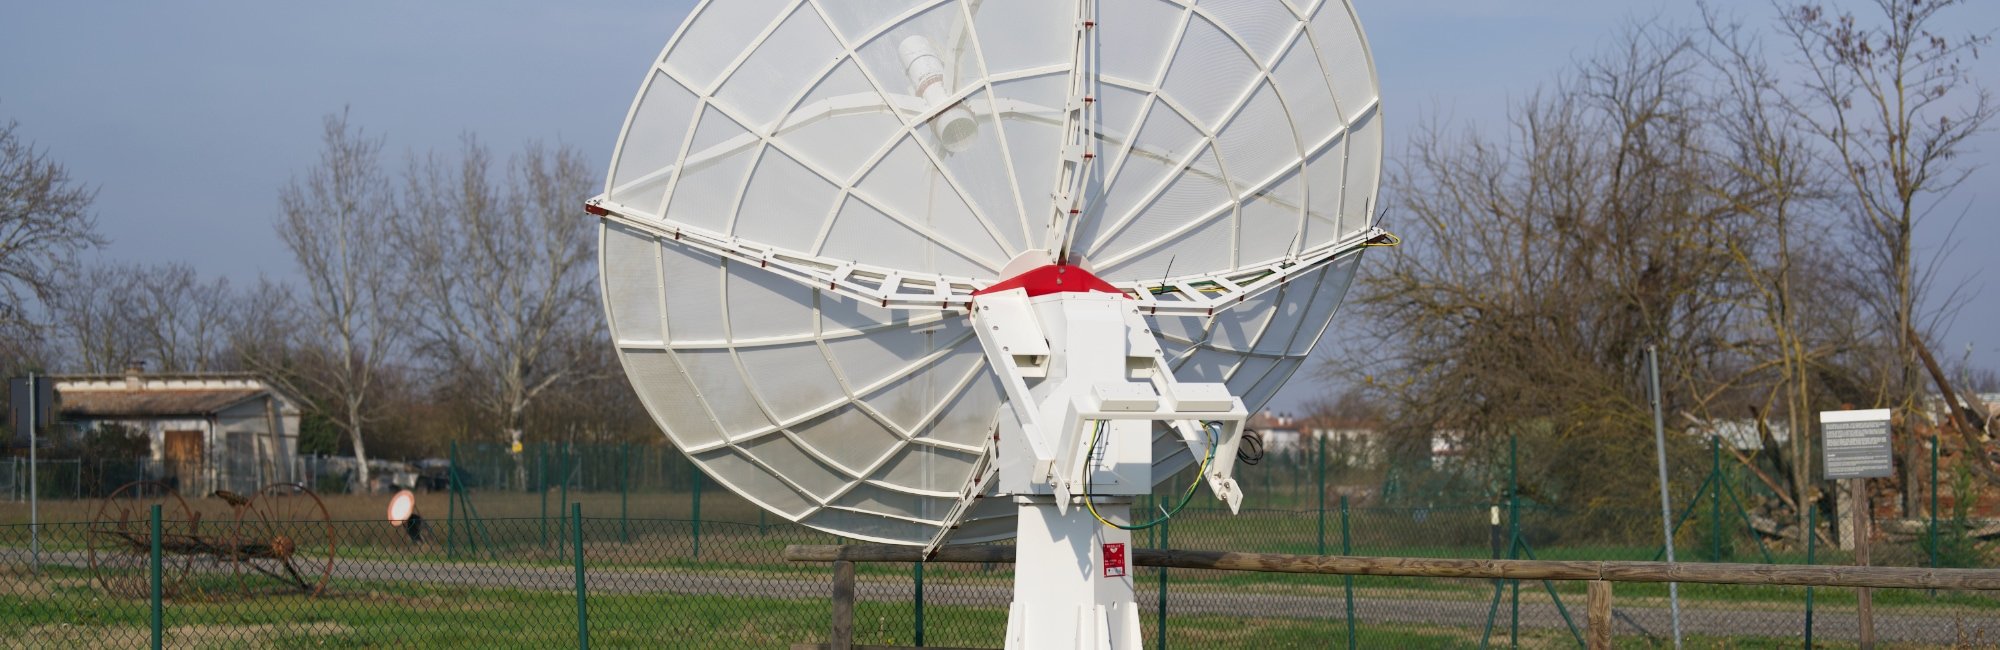 GS-100 antenna tracking system